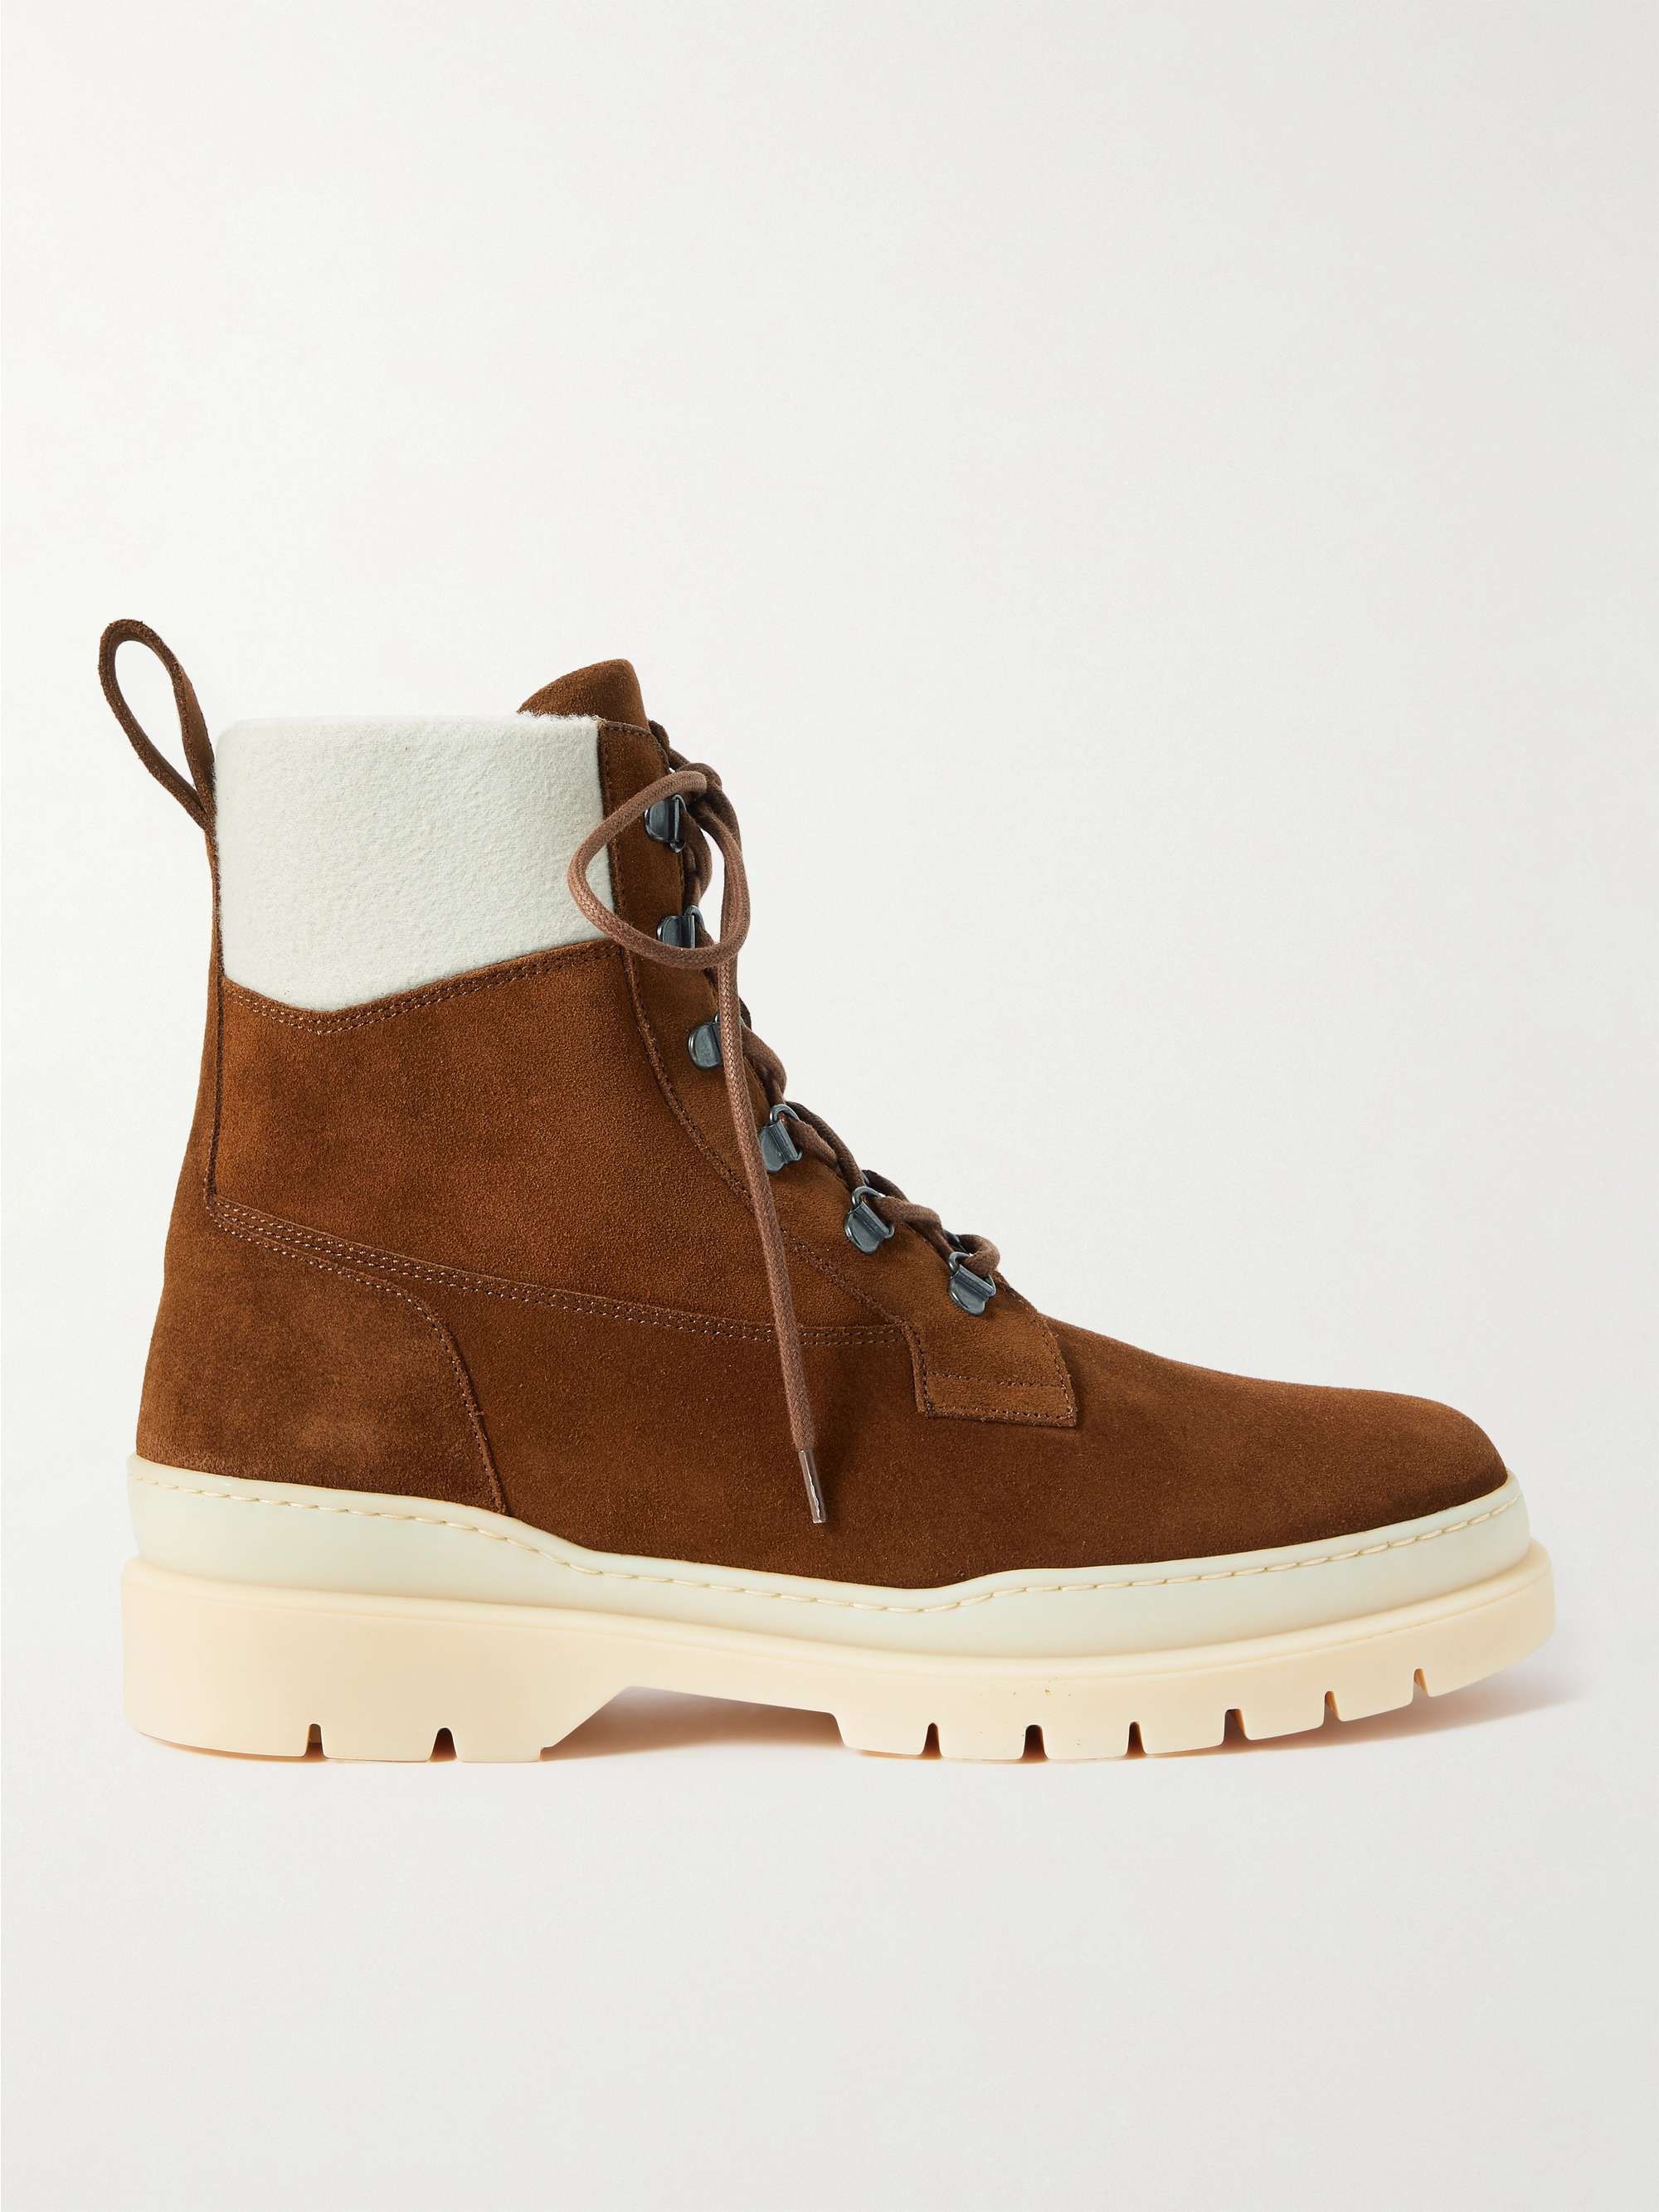 LORO PIANA Gravel Shearling-Lined Suede Hiking Boots for Men | MR PORTER